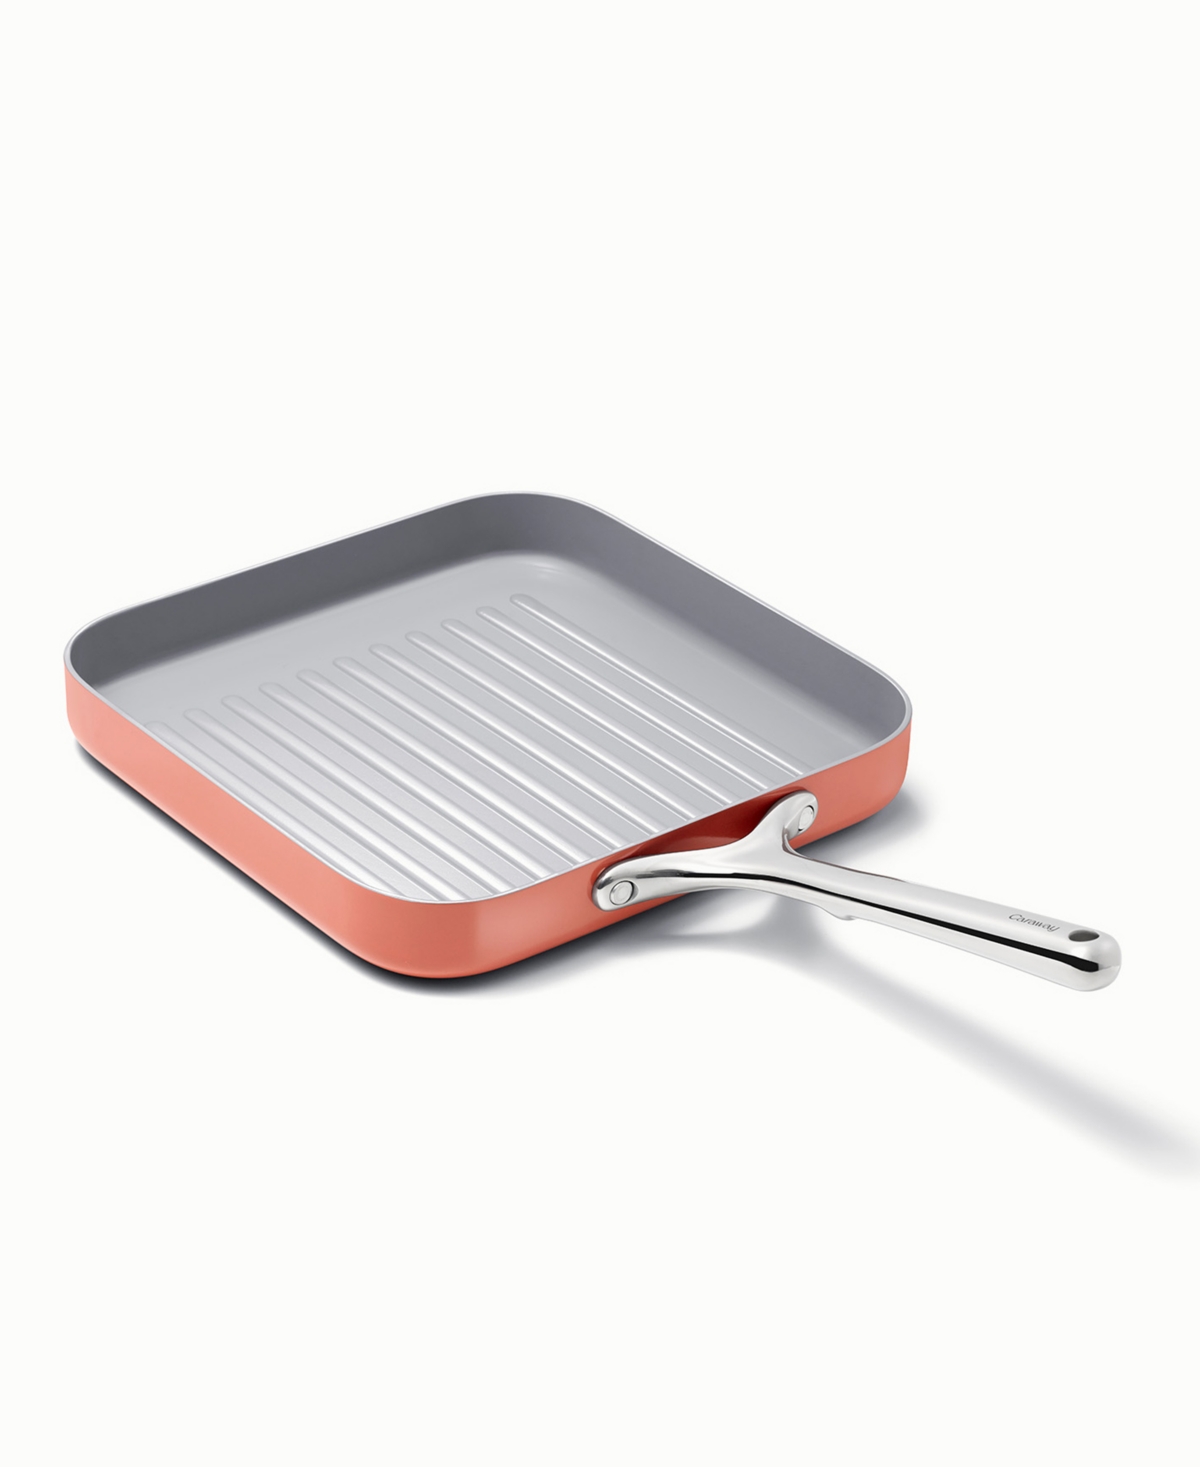 Caraway Non-stick Ceramic-coated 11" Square Grill Pan In Perracotta